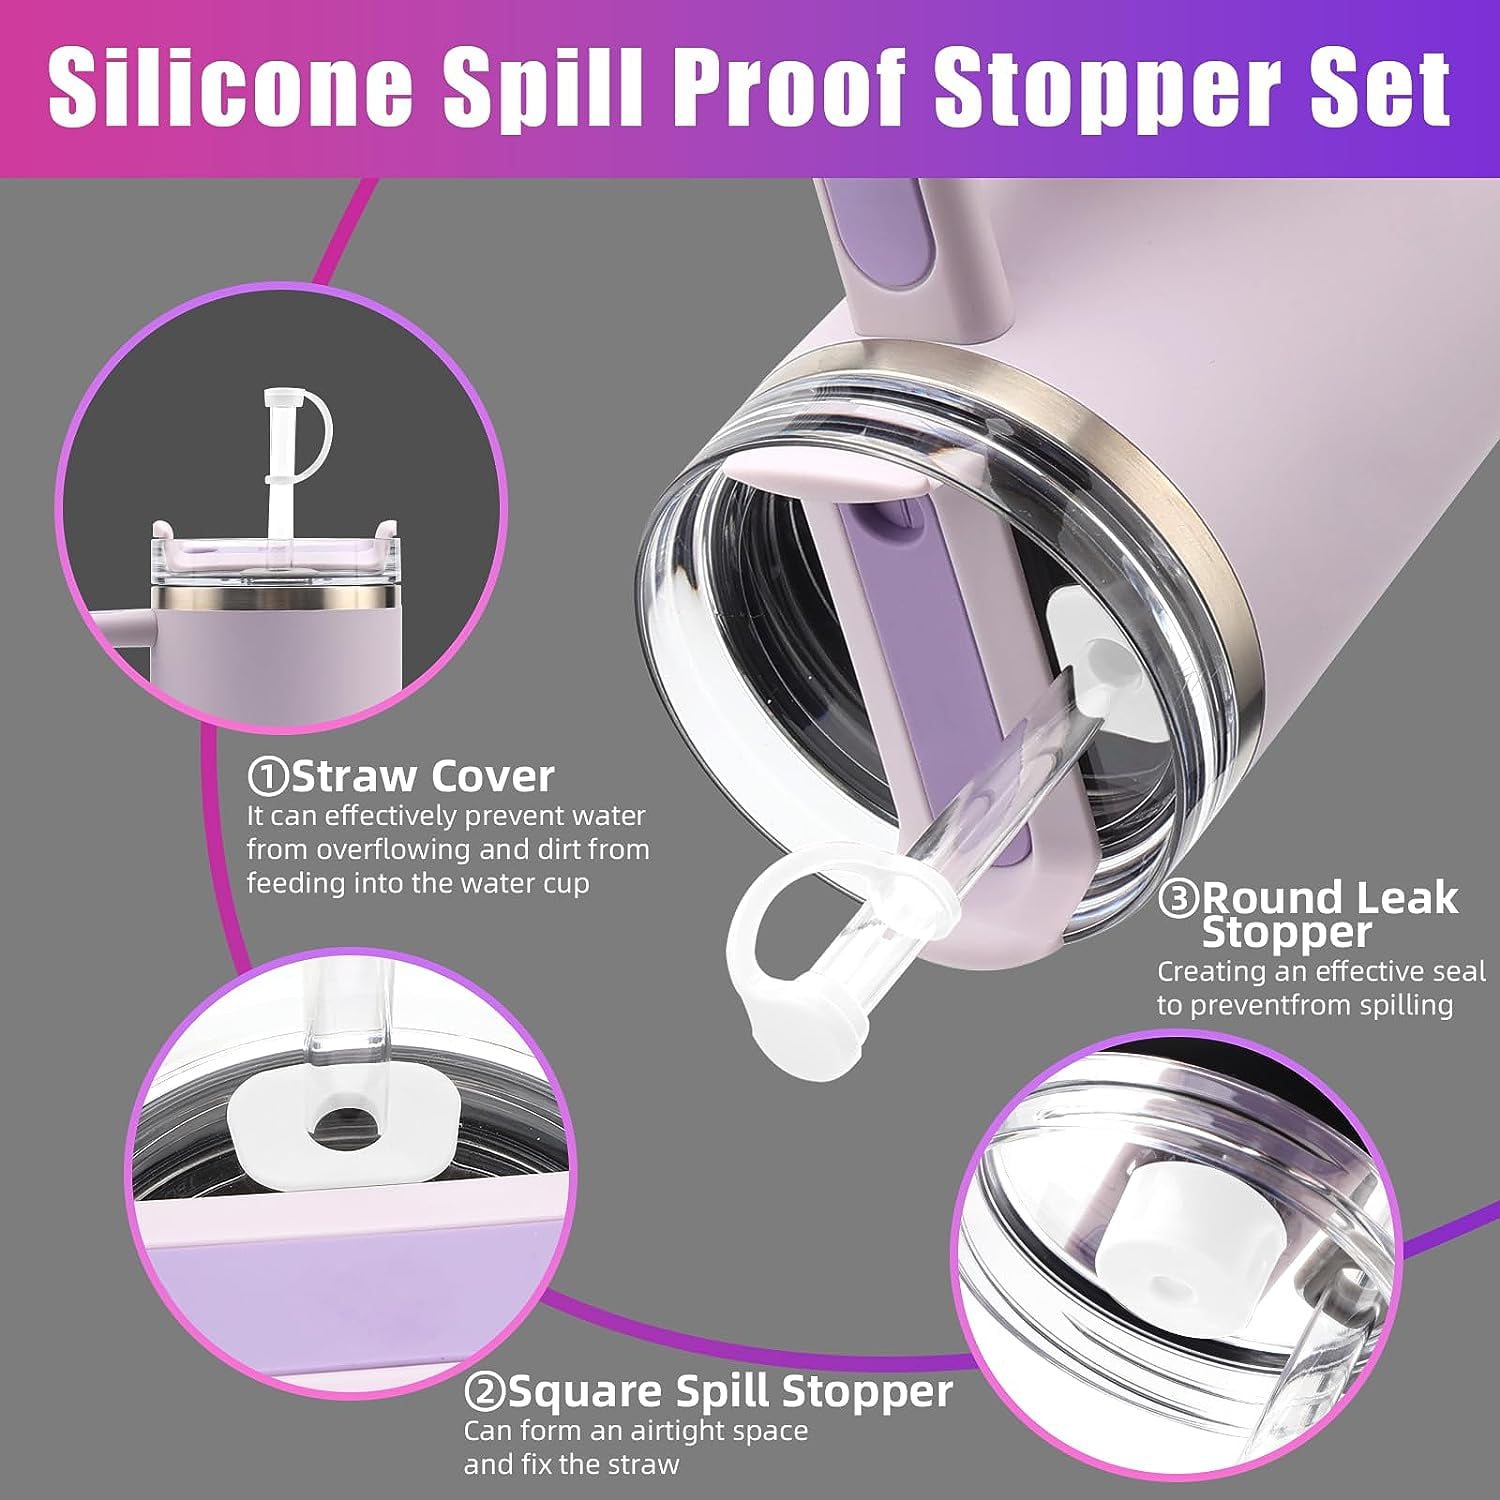 Silicone Spill Proof Stopper Set With Straw Cover Cap Square Spill Stopper  Round Leak Stopper – the best products in the Joom Geek online store